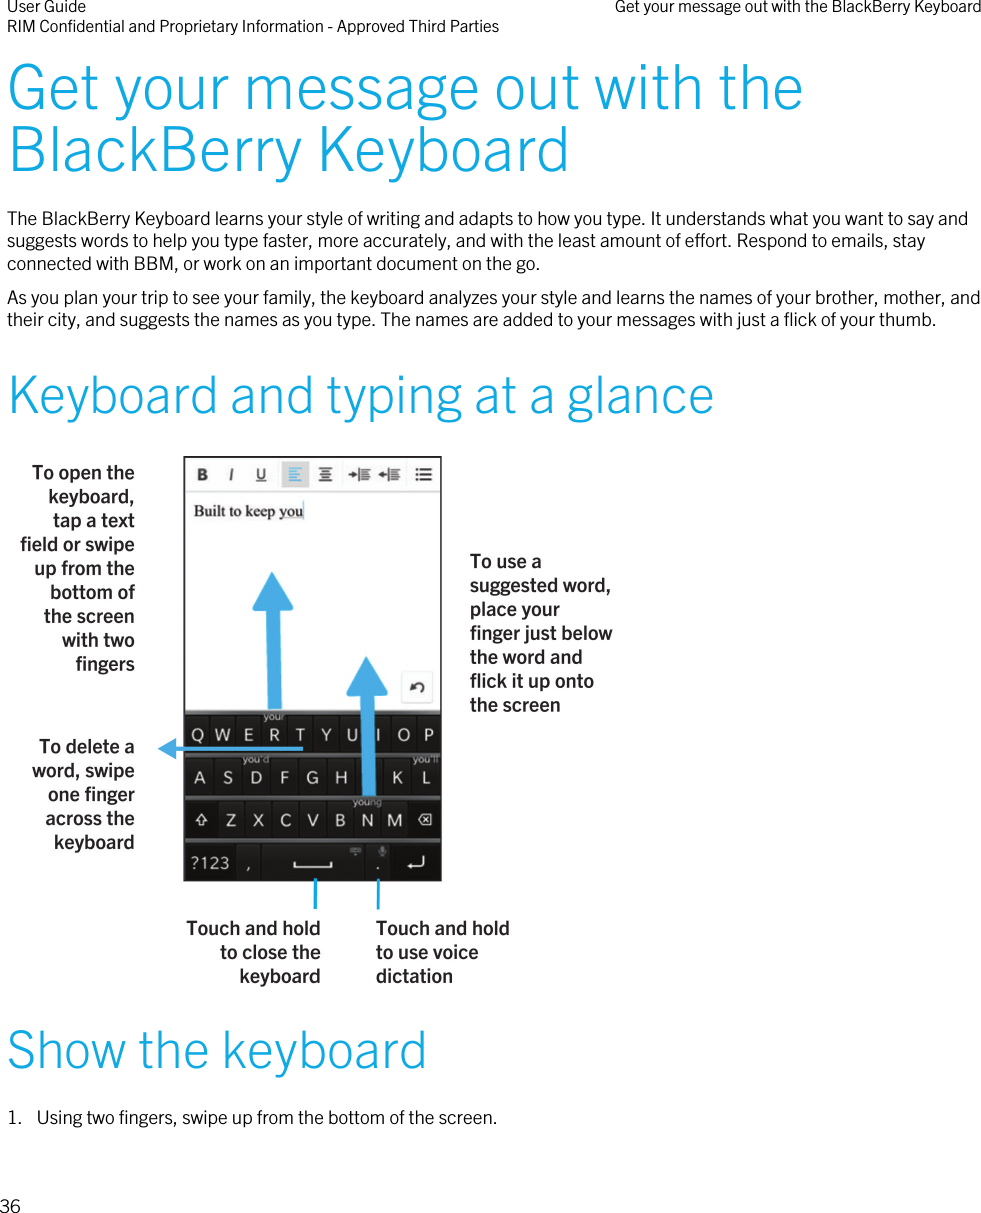 Get your message out with theBlackBerry KeyboardThe BlackBerry Keyboard learns your style of writing and adapts to how you type. It understands what you want to say andsuggests words to help you type faster, more accurately, and with the least amount of effort. Respond to emails, stayconnected with BBM, or work on an important document on the go.As you plan your trip to see your family, the keyboard analyzes your style and learns the names of your brother, mother, andtheir city, and suggests the names as you type. The names are added to your messages with just a flick of your thumb.Keyboard and typing at a glance Show the keyboard1. Using two fingers, swipe up from the bottom of the screen.User GuideRIM Confidential and Proprietary Information - Approved Third Parties Get your message out with the BlackBerry Keyboard36